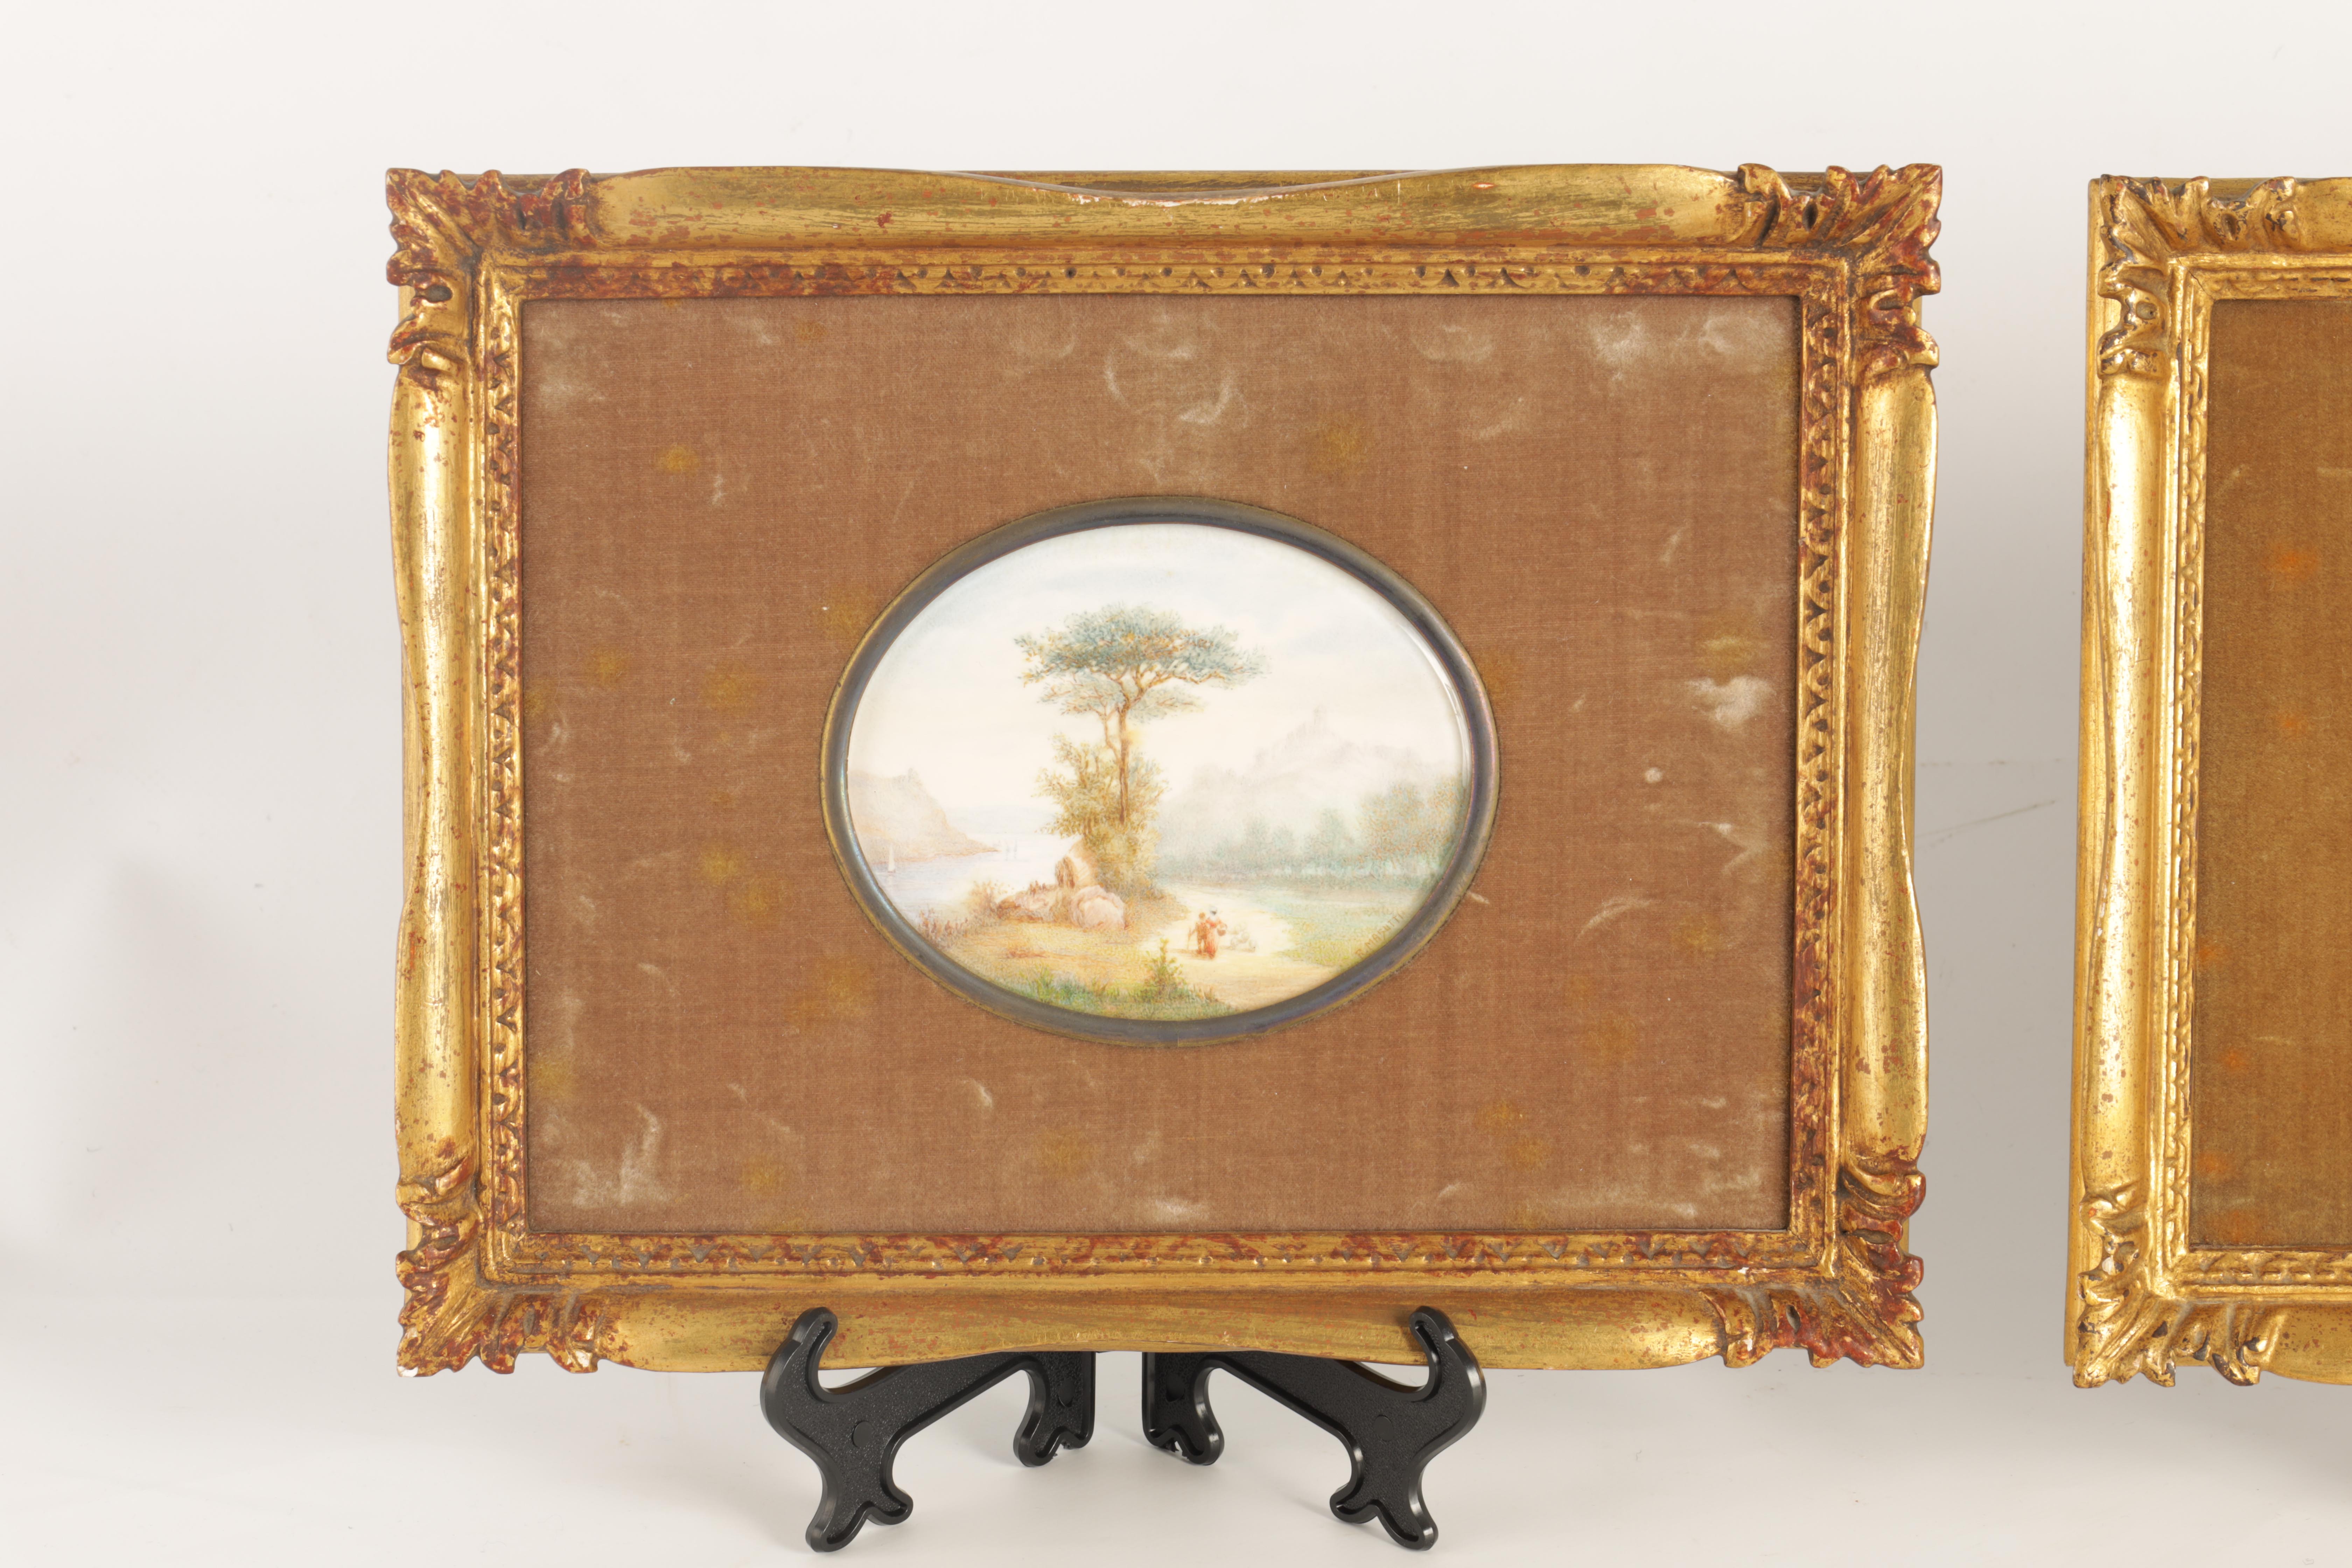 R. MASUTTI A SET OF FOUR LATE 19TH CENTURY OVAL MINIATURES ON IVORY landscape and lake views 9cm - Image 10 of 13